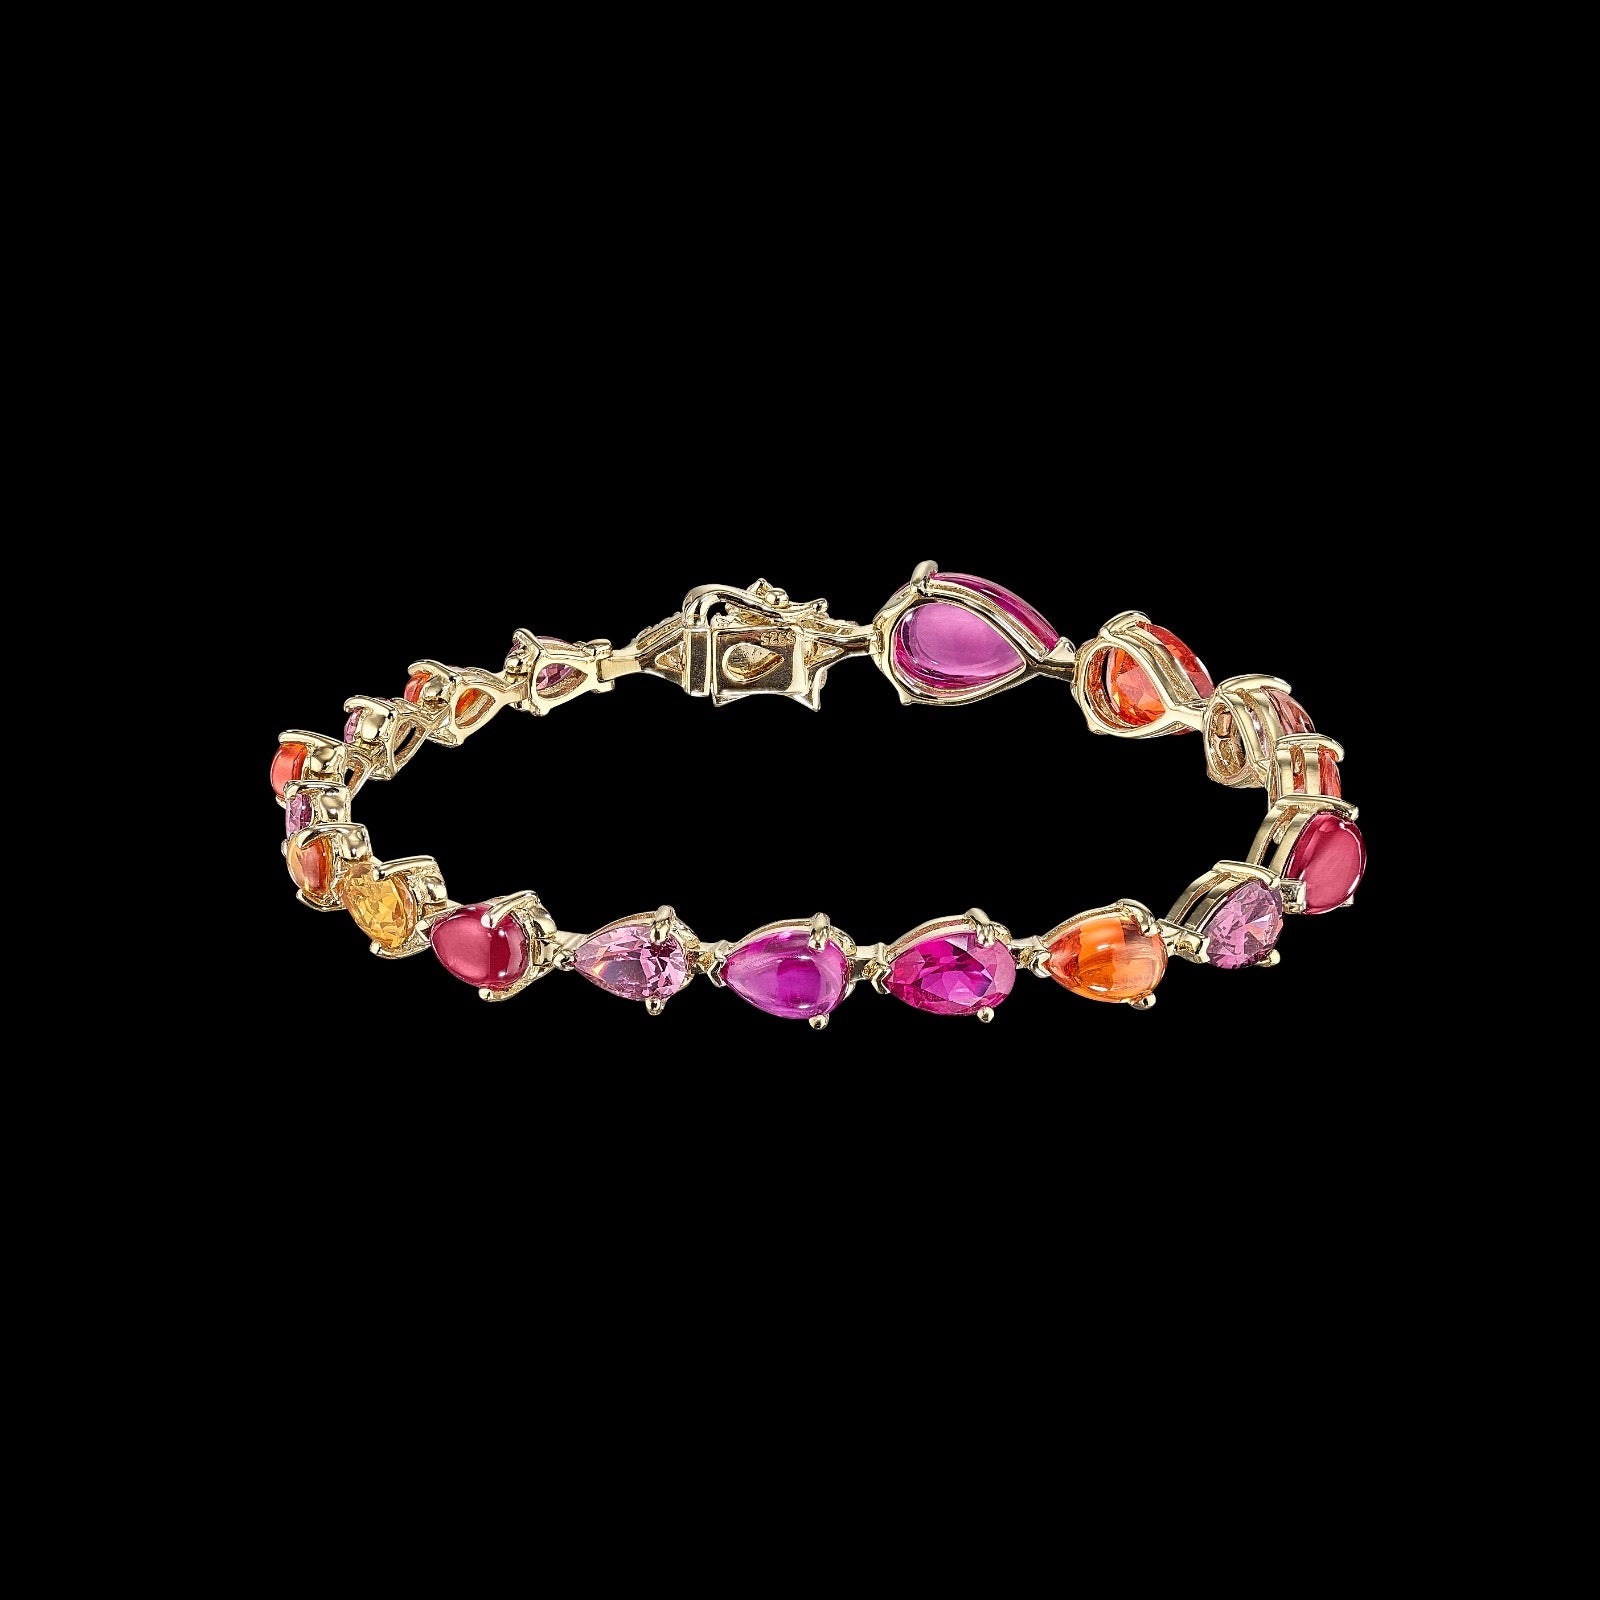 Sunset Nova Bracelet, Bracelet, Anabela Chan Joaillerie - Fine jewelry with laboratory grown and created gemstones hand-crafted in the United Kingdom. Anabela Chan Joaillerie is the first fine jewellery brand in the world to champion laboratory-grown and created gemstones with high jewellery design, artisanal craftsmanship and a focus on ethical and sustainable innovations.